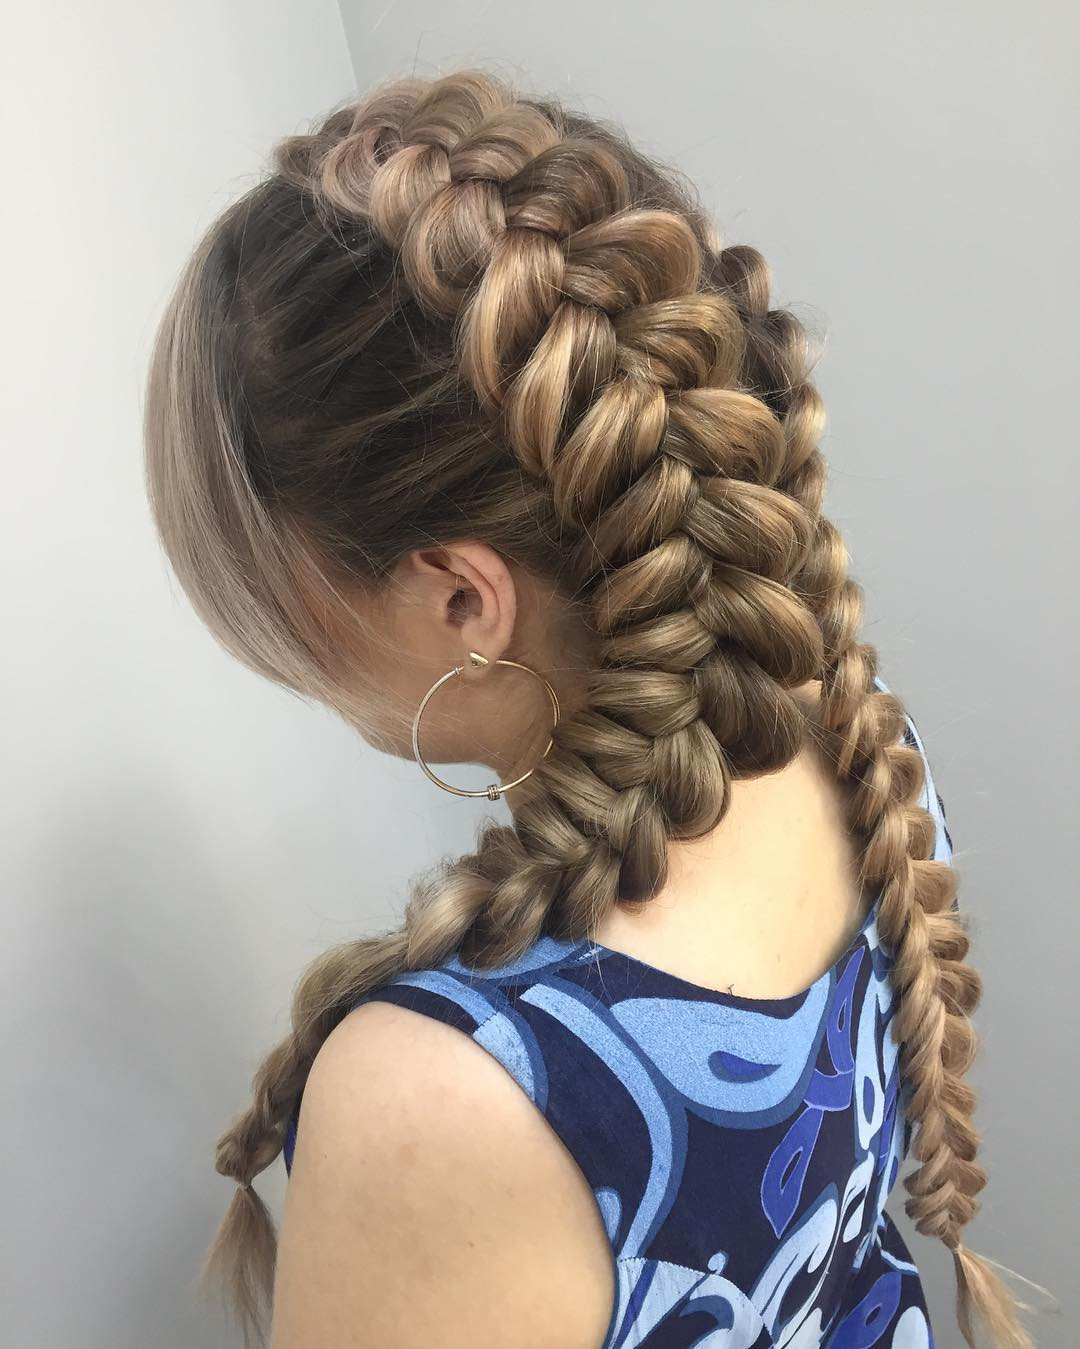 Braided Pigtail Hairstyles
 Dutch Braid Pigtail Hairstyle For Women